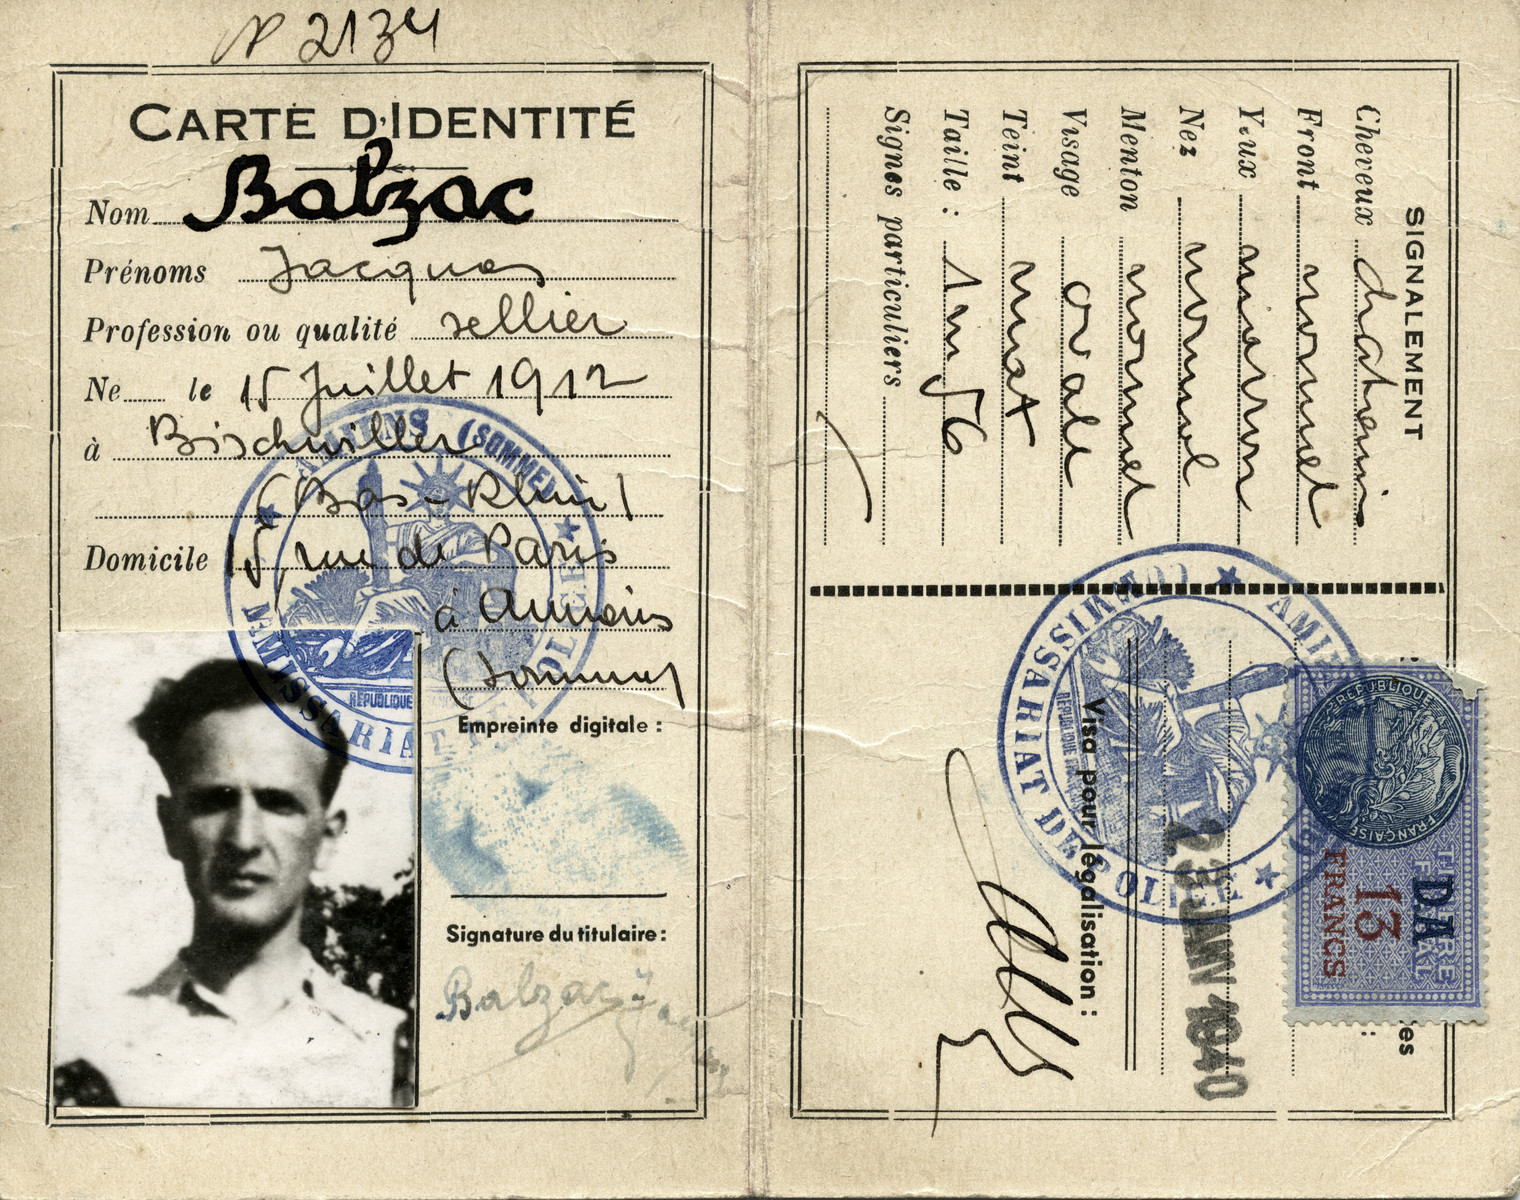 False identification papers given to Jacques Balsam under the pseudonym of Jacques Balzac.

[The January 1940 date is clearly false as well since Germany only invaded France in May 1940, so at the time this card was supposedly issued, Aharon Yaakov Balsam was still using his true name.]